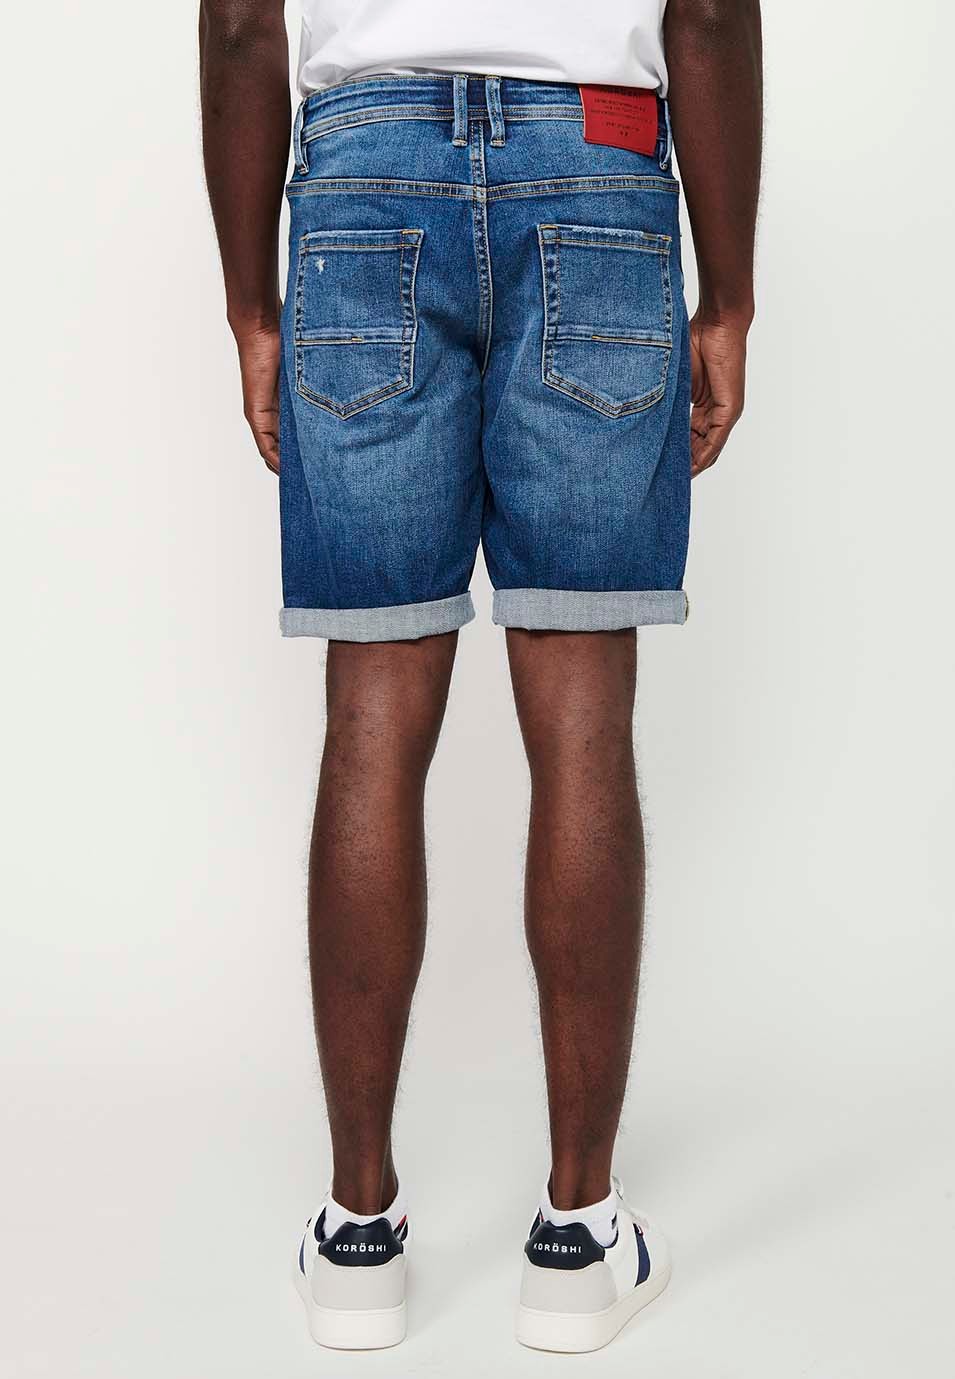 Shorts with turn-up finish and front zipper and button closure with five pockets, one blue pocket pocket for Men 1